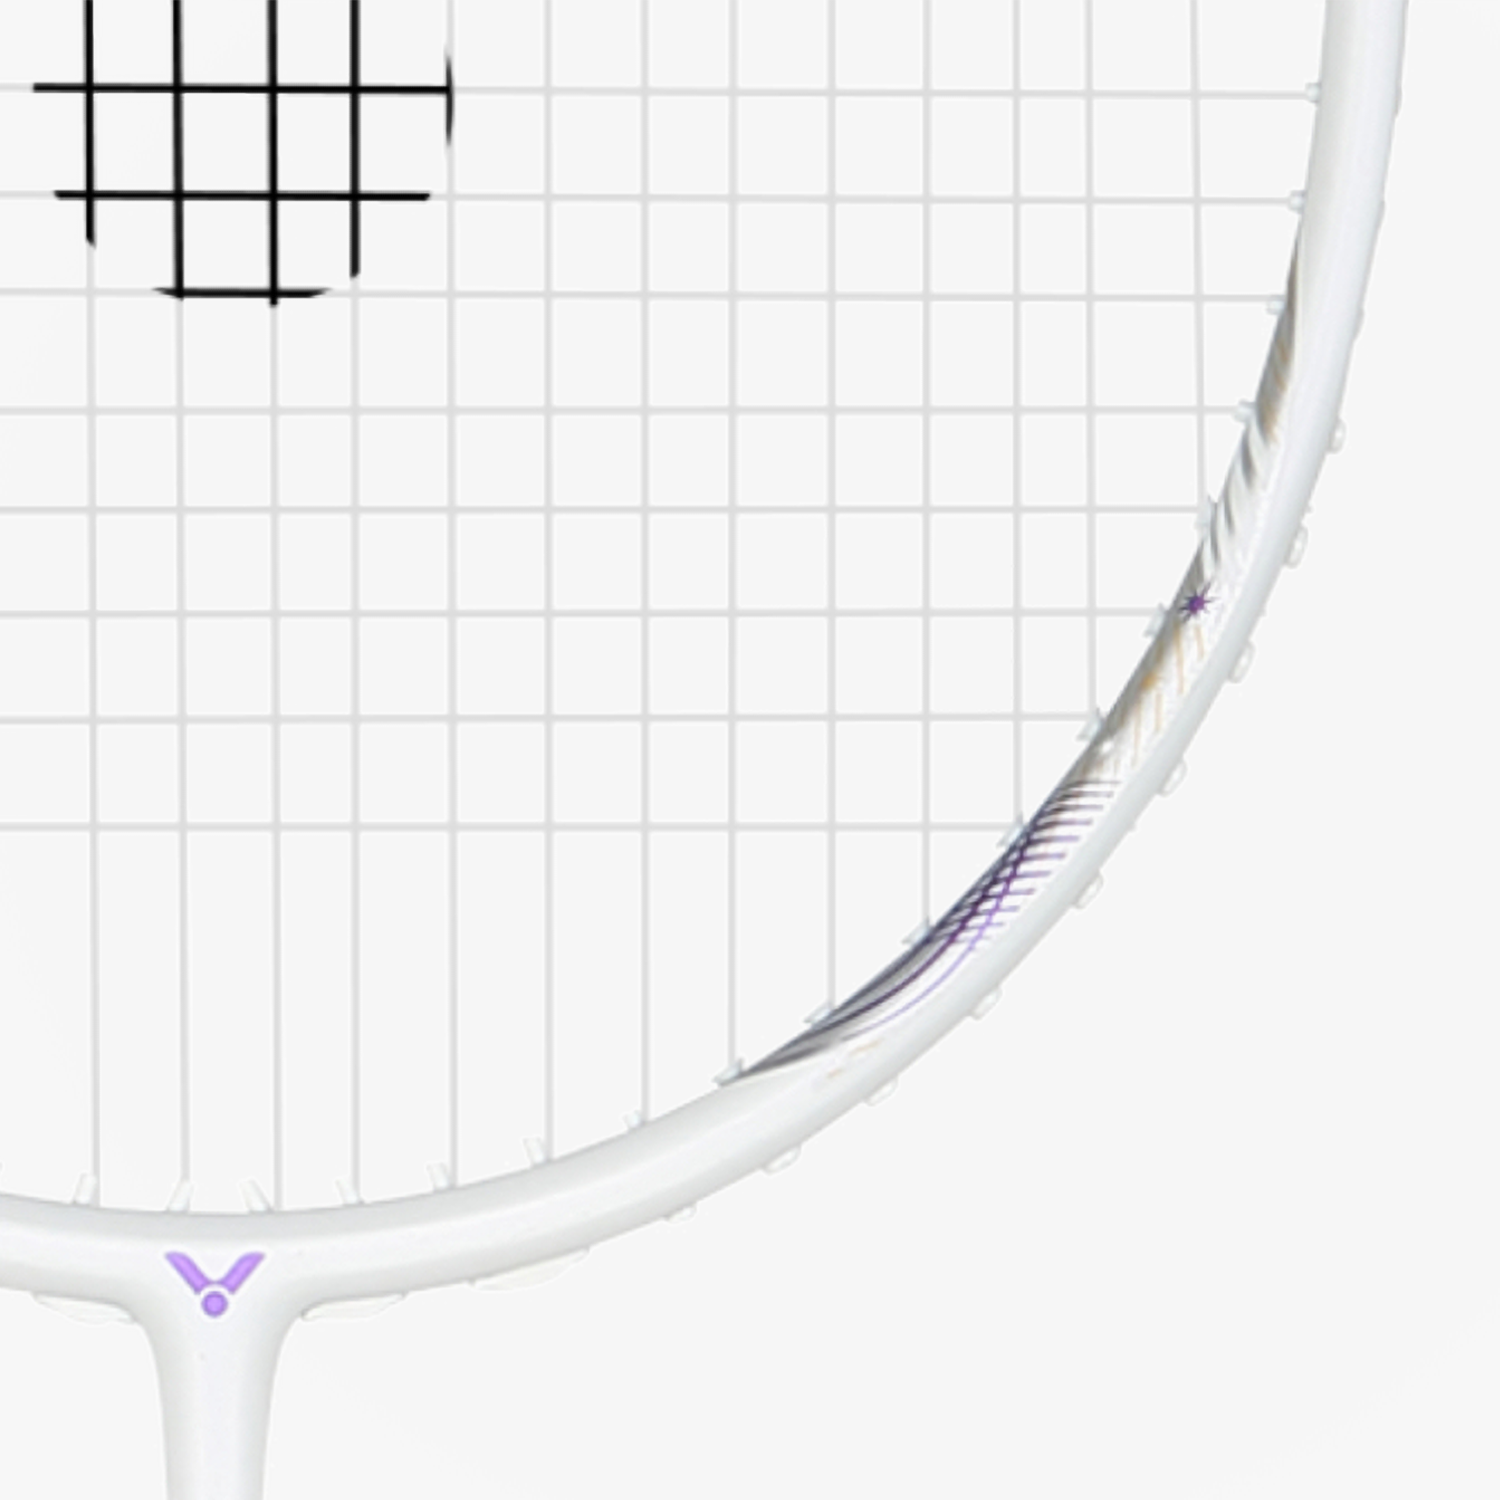 Victor Thruster TTY A Tai Tzu Ying Edition (White) TK-TTY A